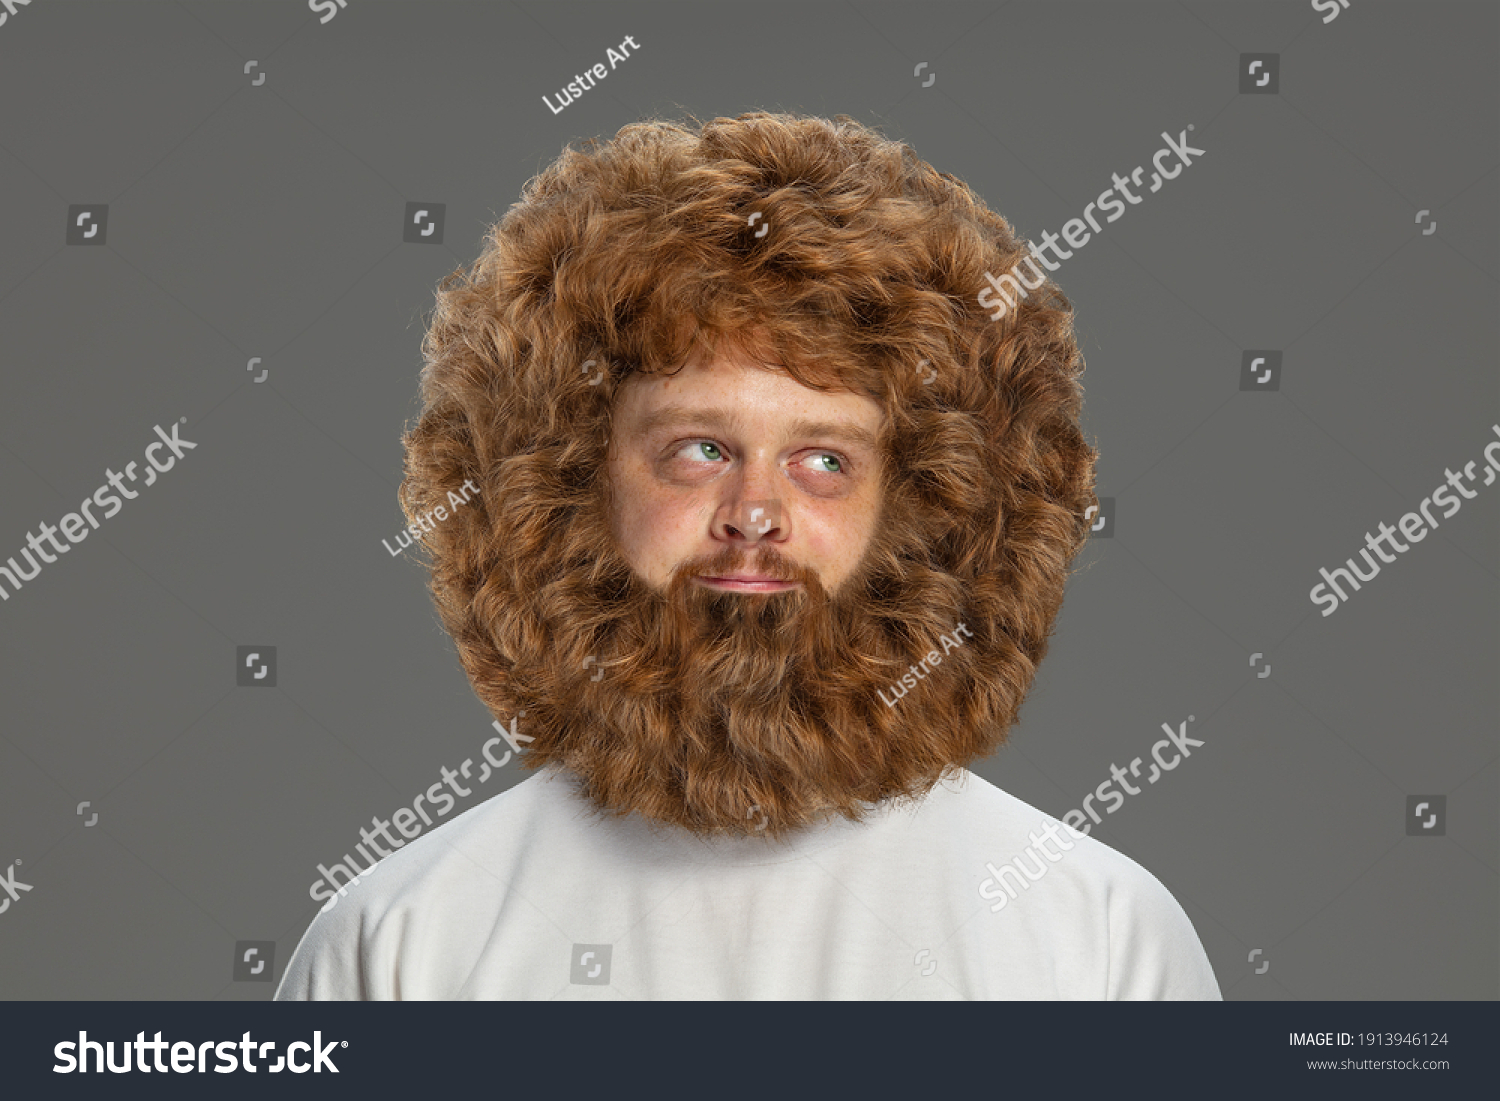 Half-length portrait of young very hairy man isolated over grey background. #1913946124